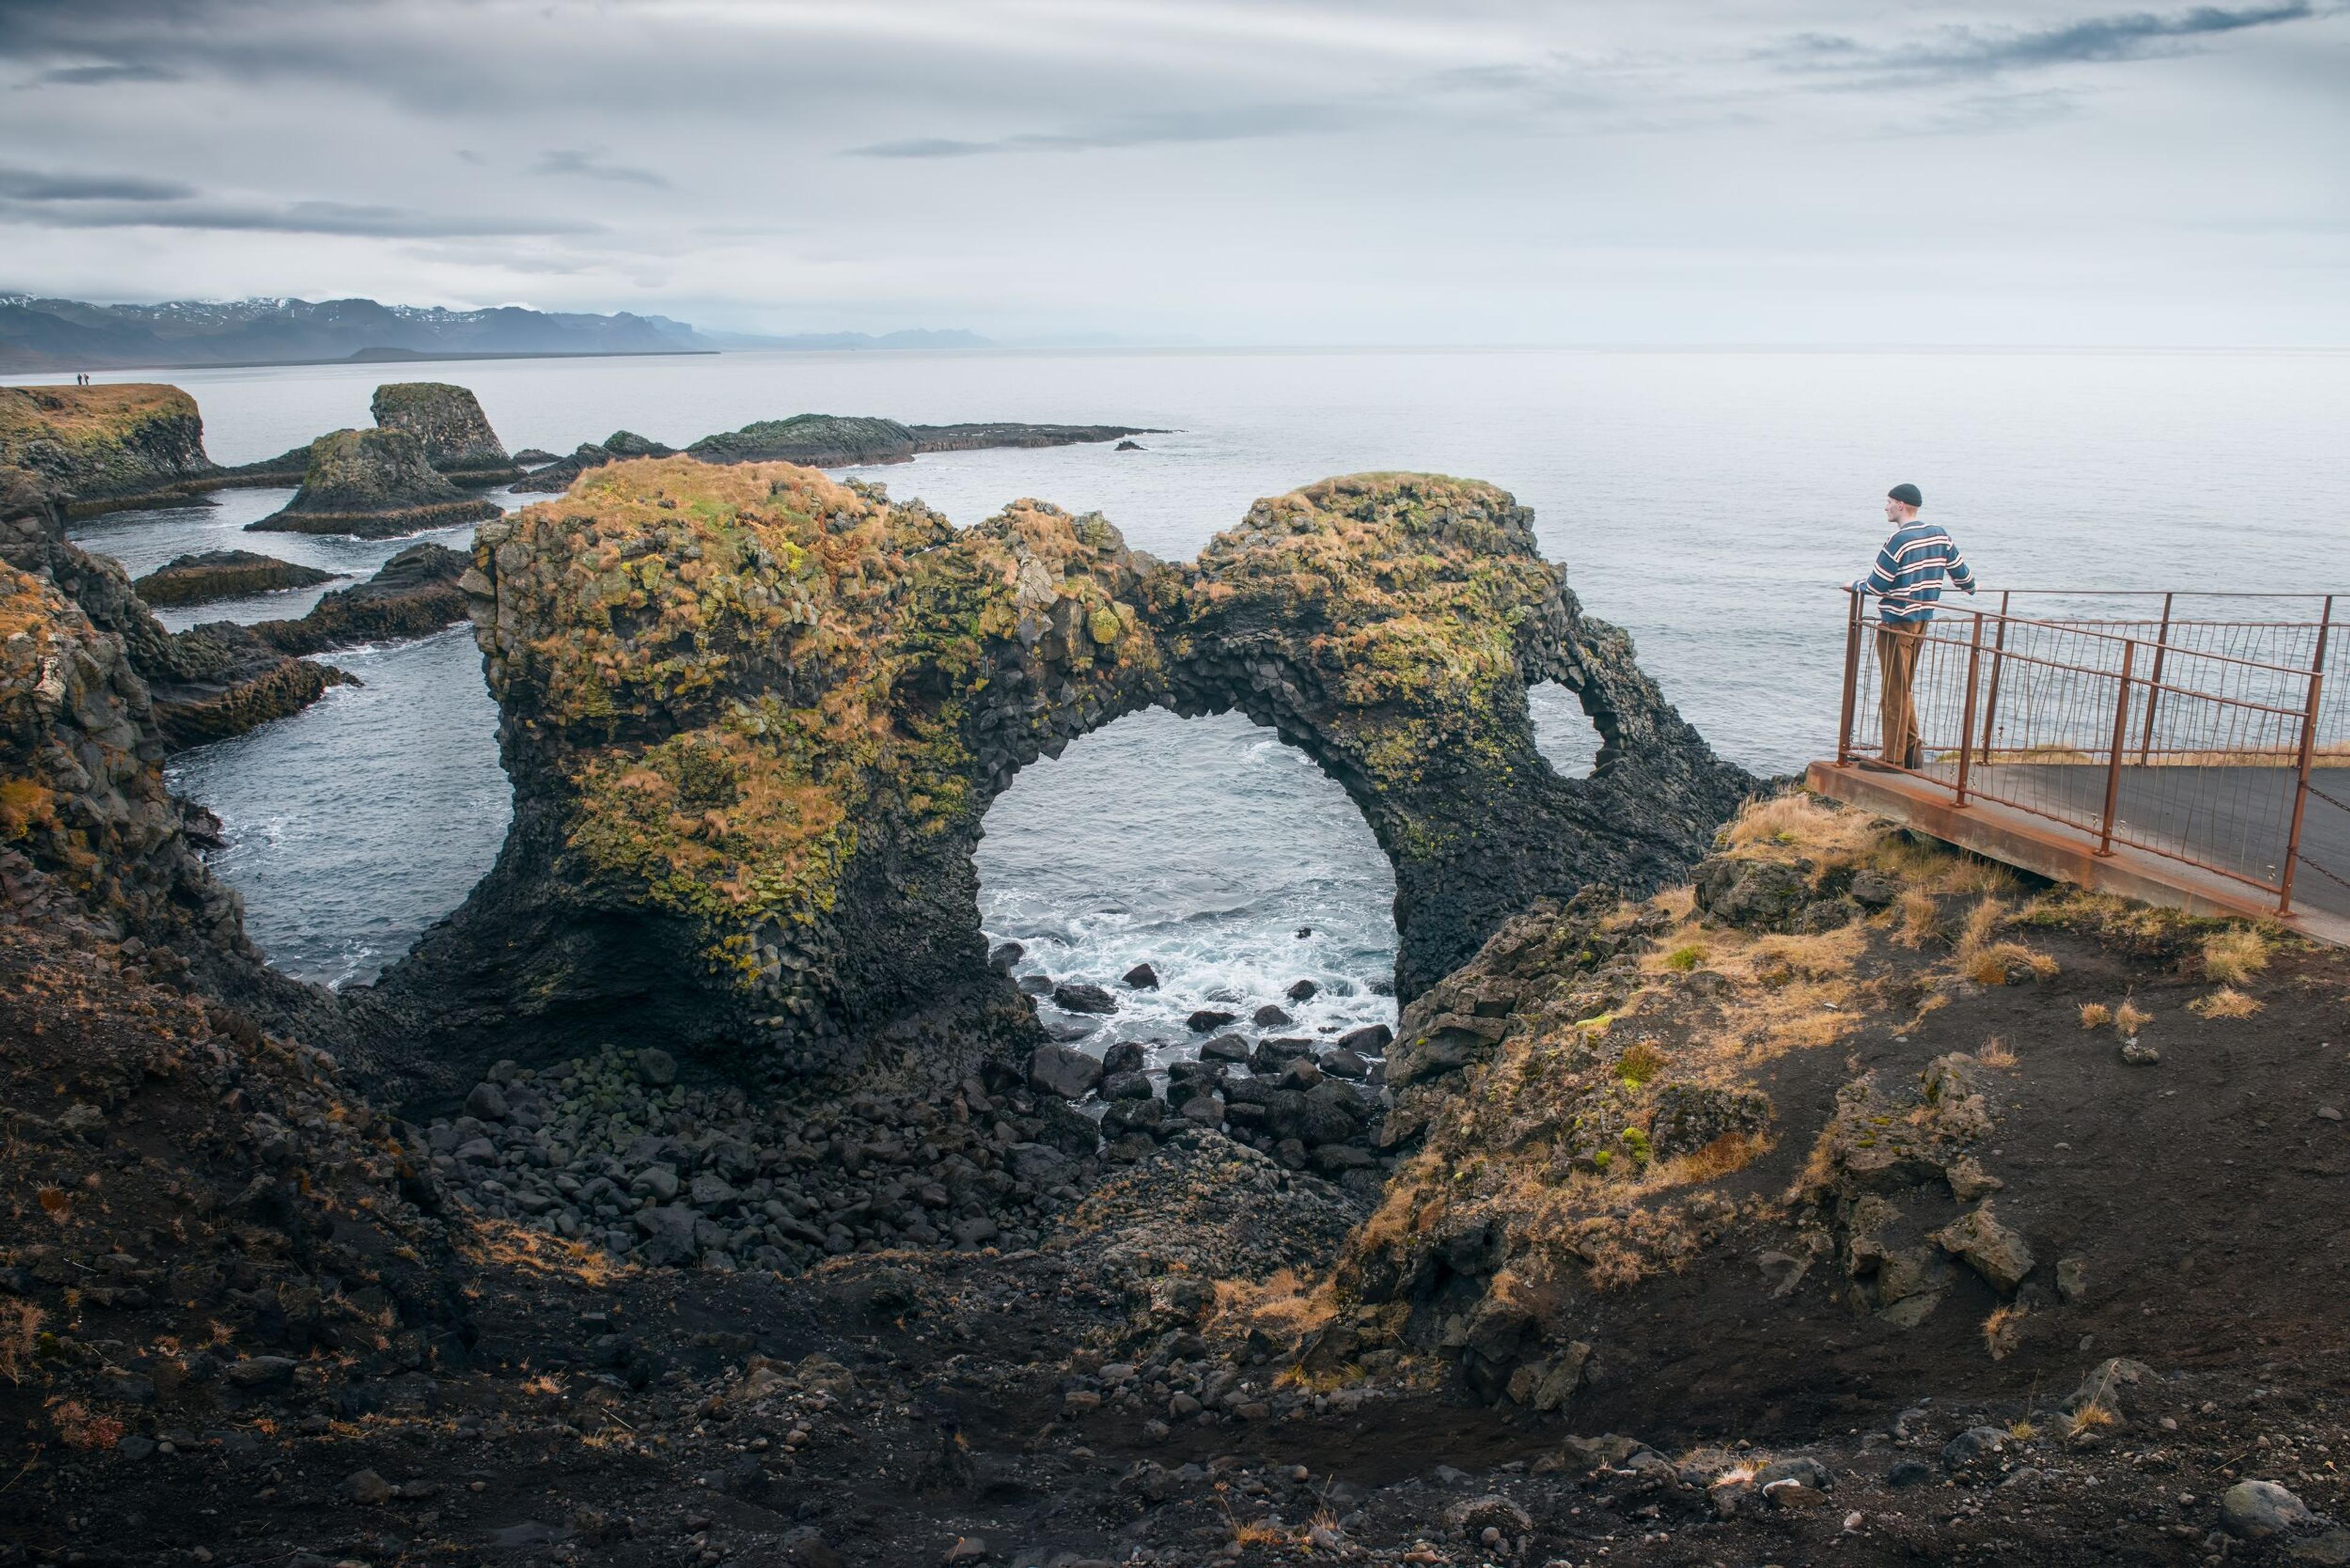 A person stands on a viewing platform overlooking a rugged coastline with distinctive rock arches and formations, under an overcast sky.